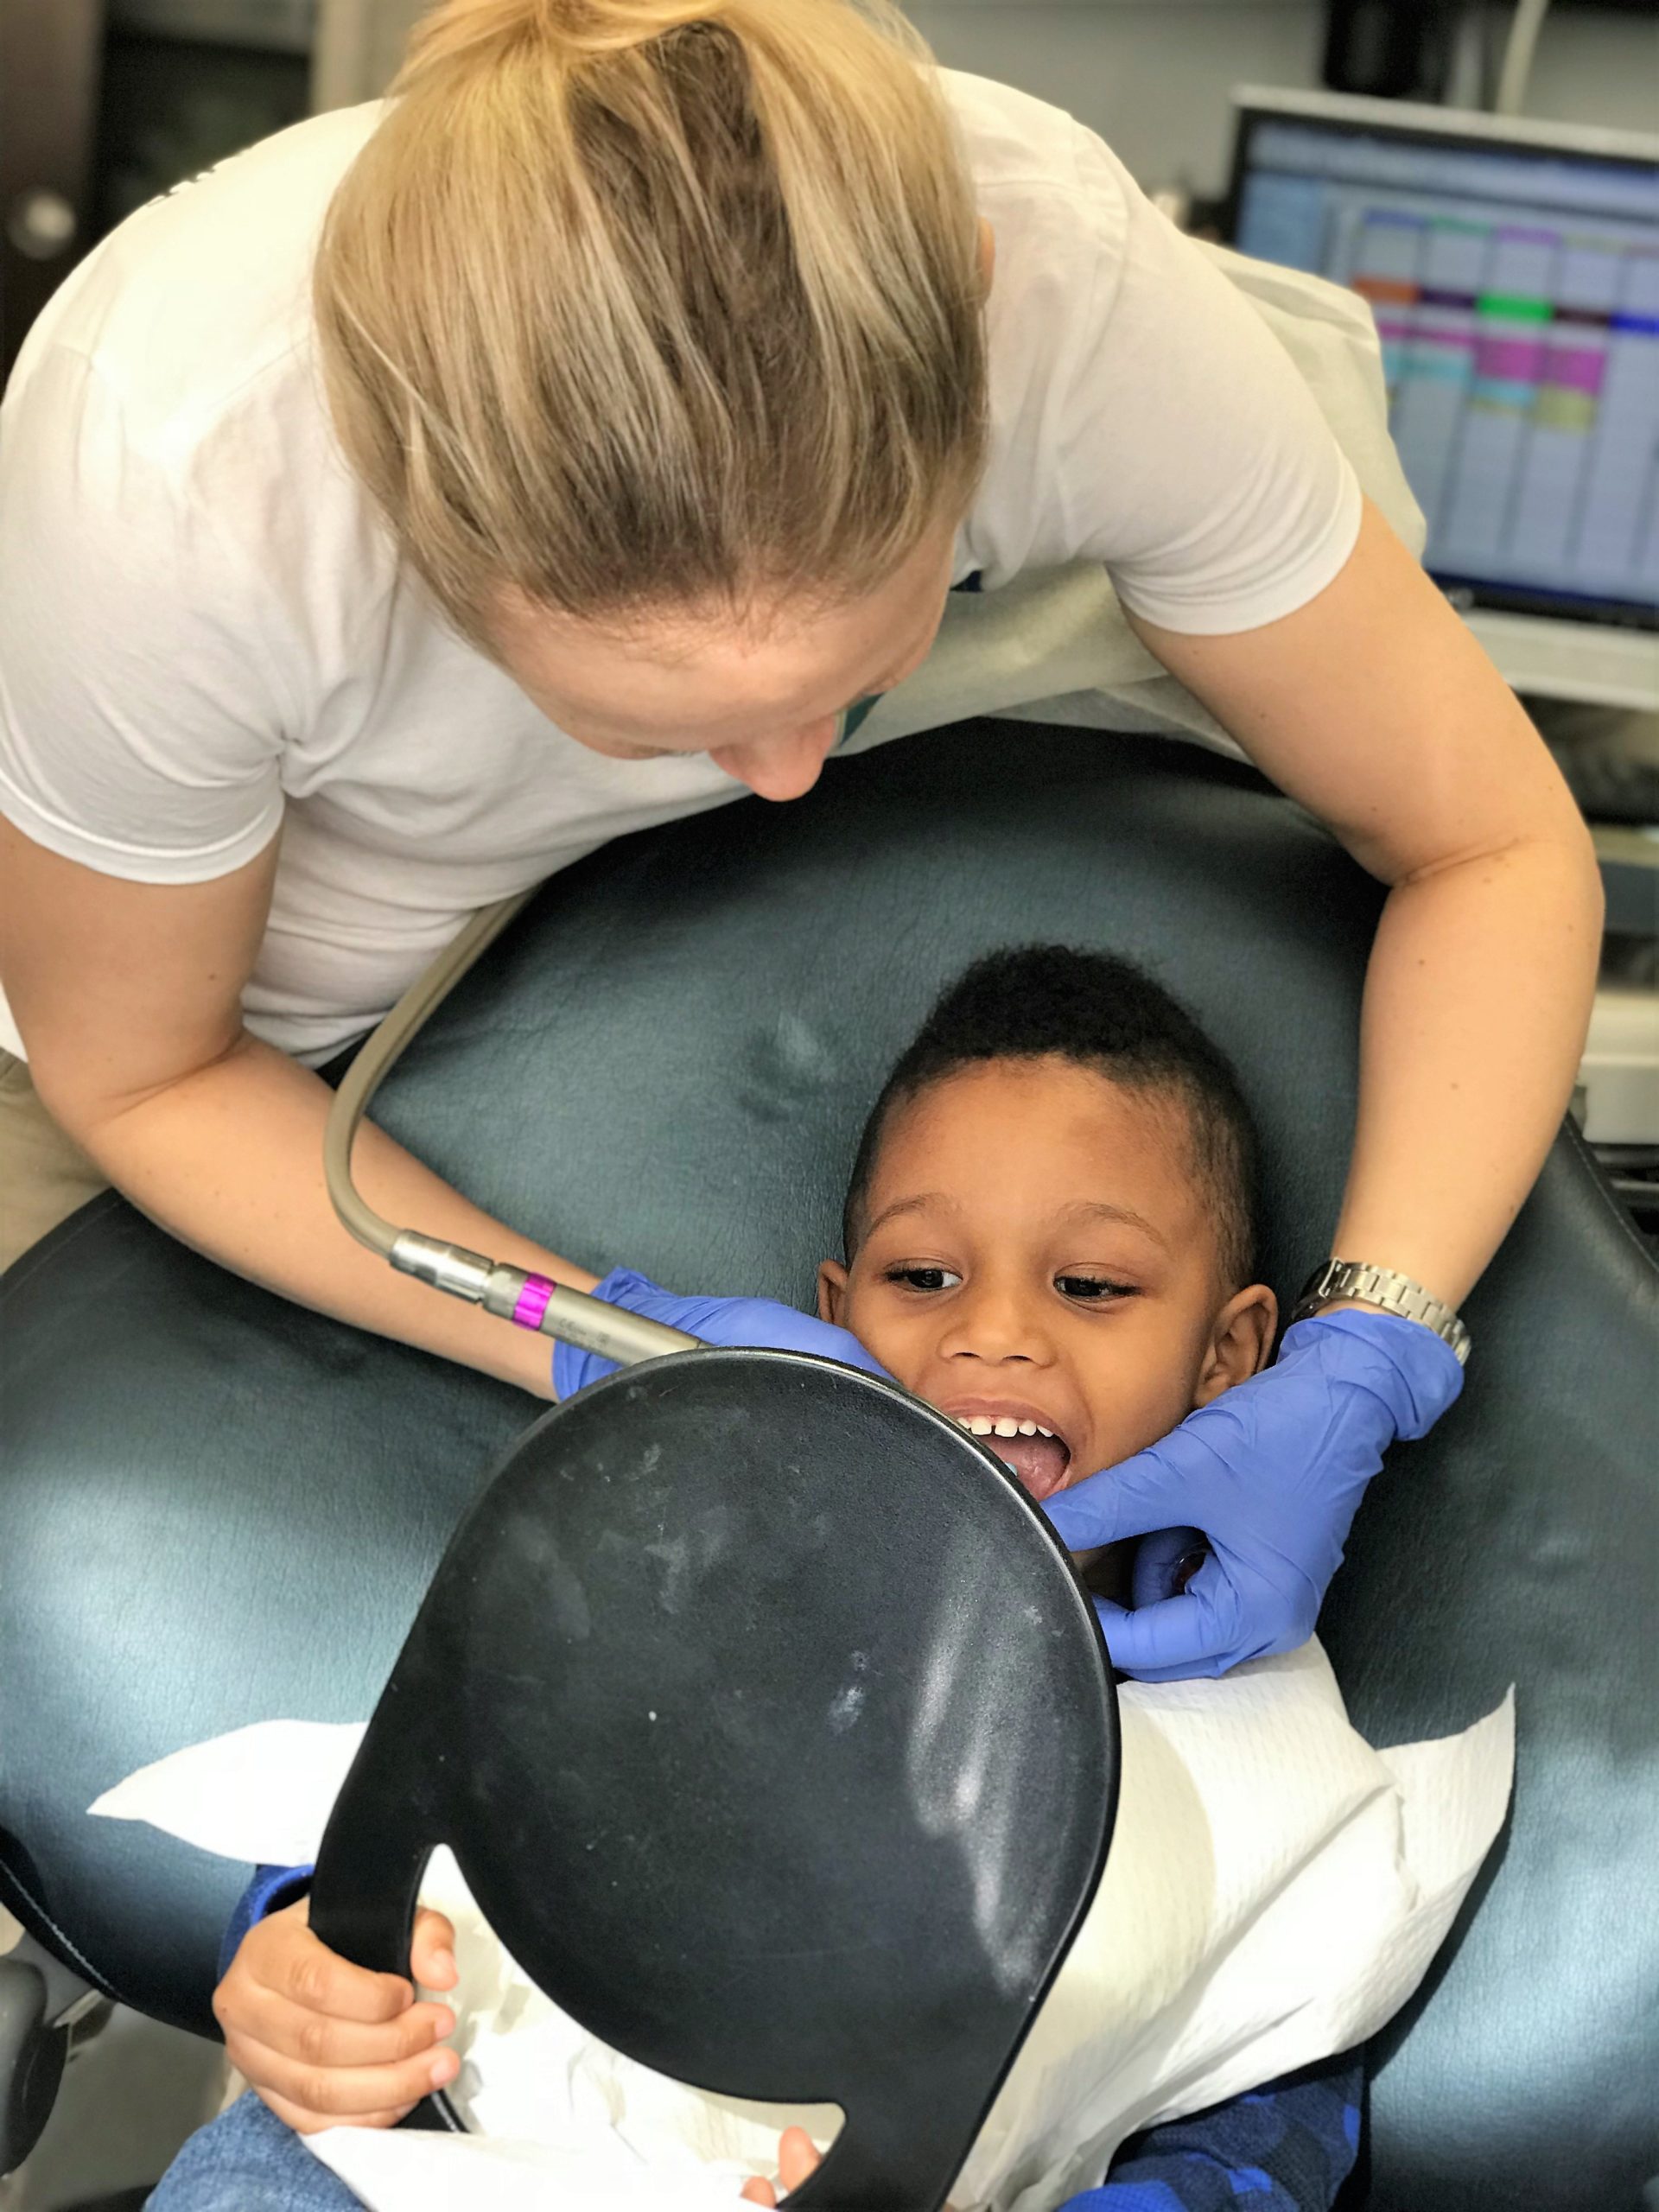 Anna Kwasnik, a dentist with Passes Dental Care in Great Neck, works on cleaning a child's mouth. (Photo courtesy of Passes Dental Care)